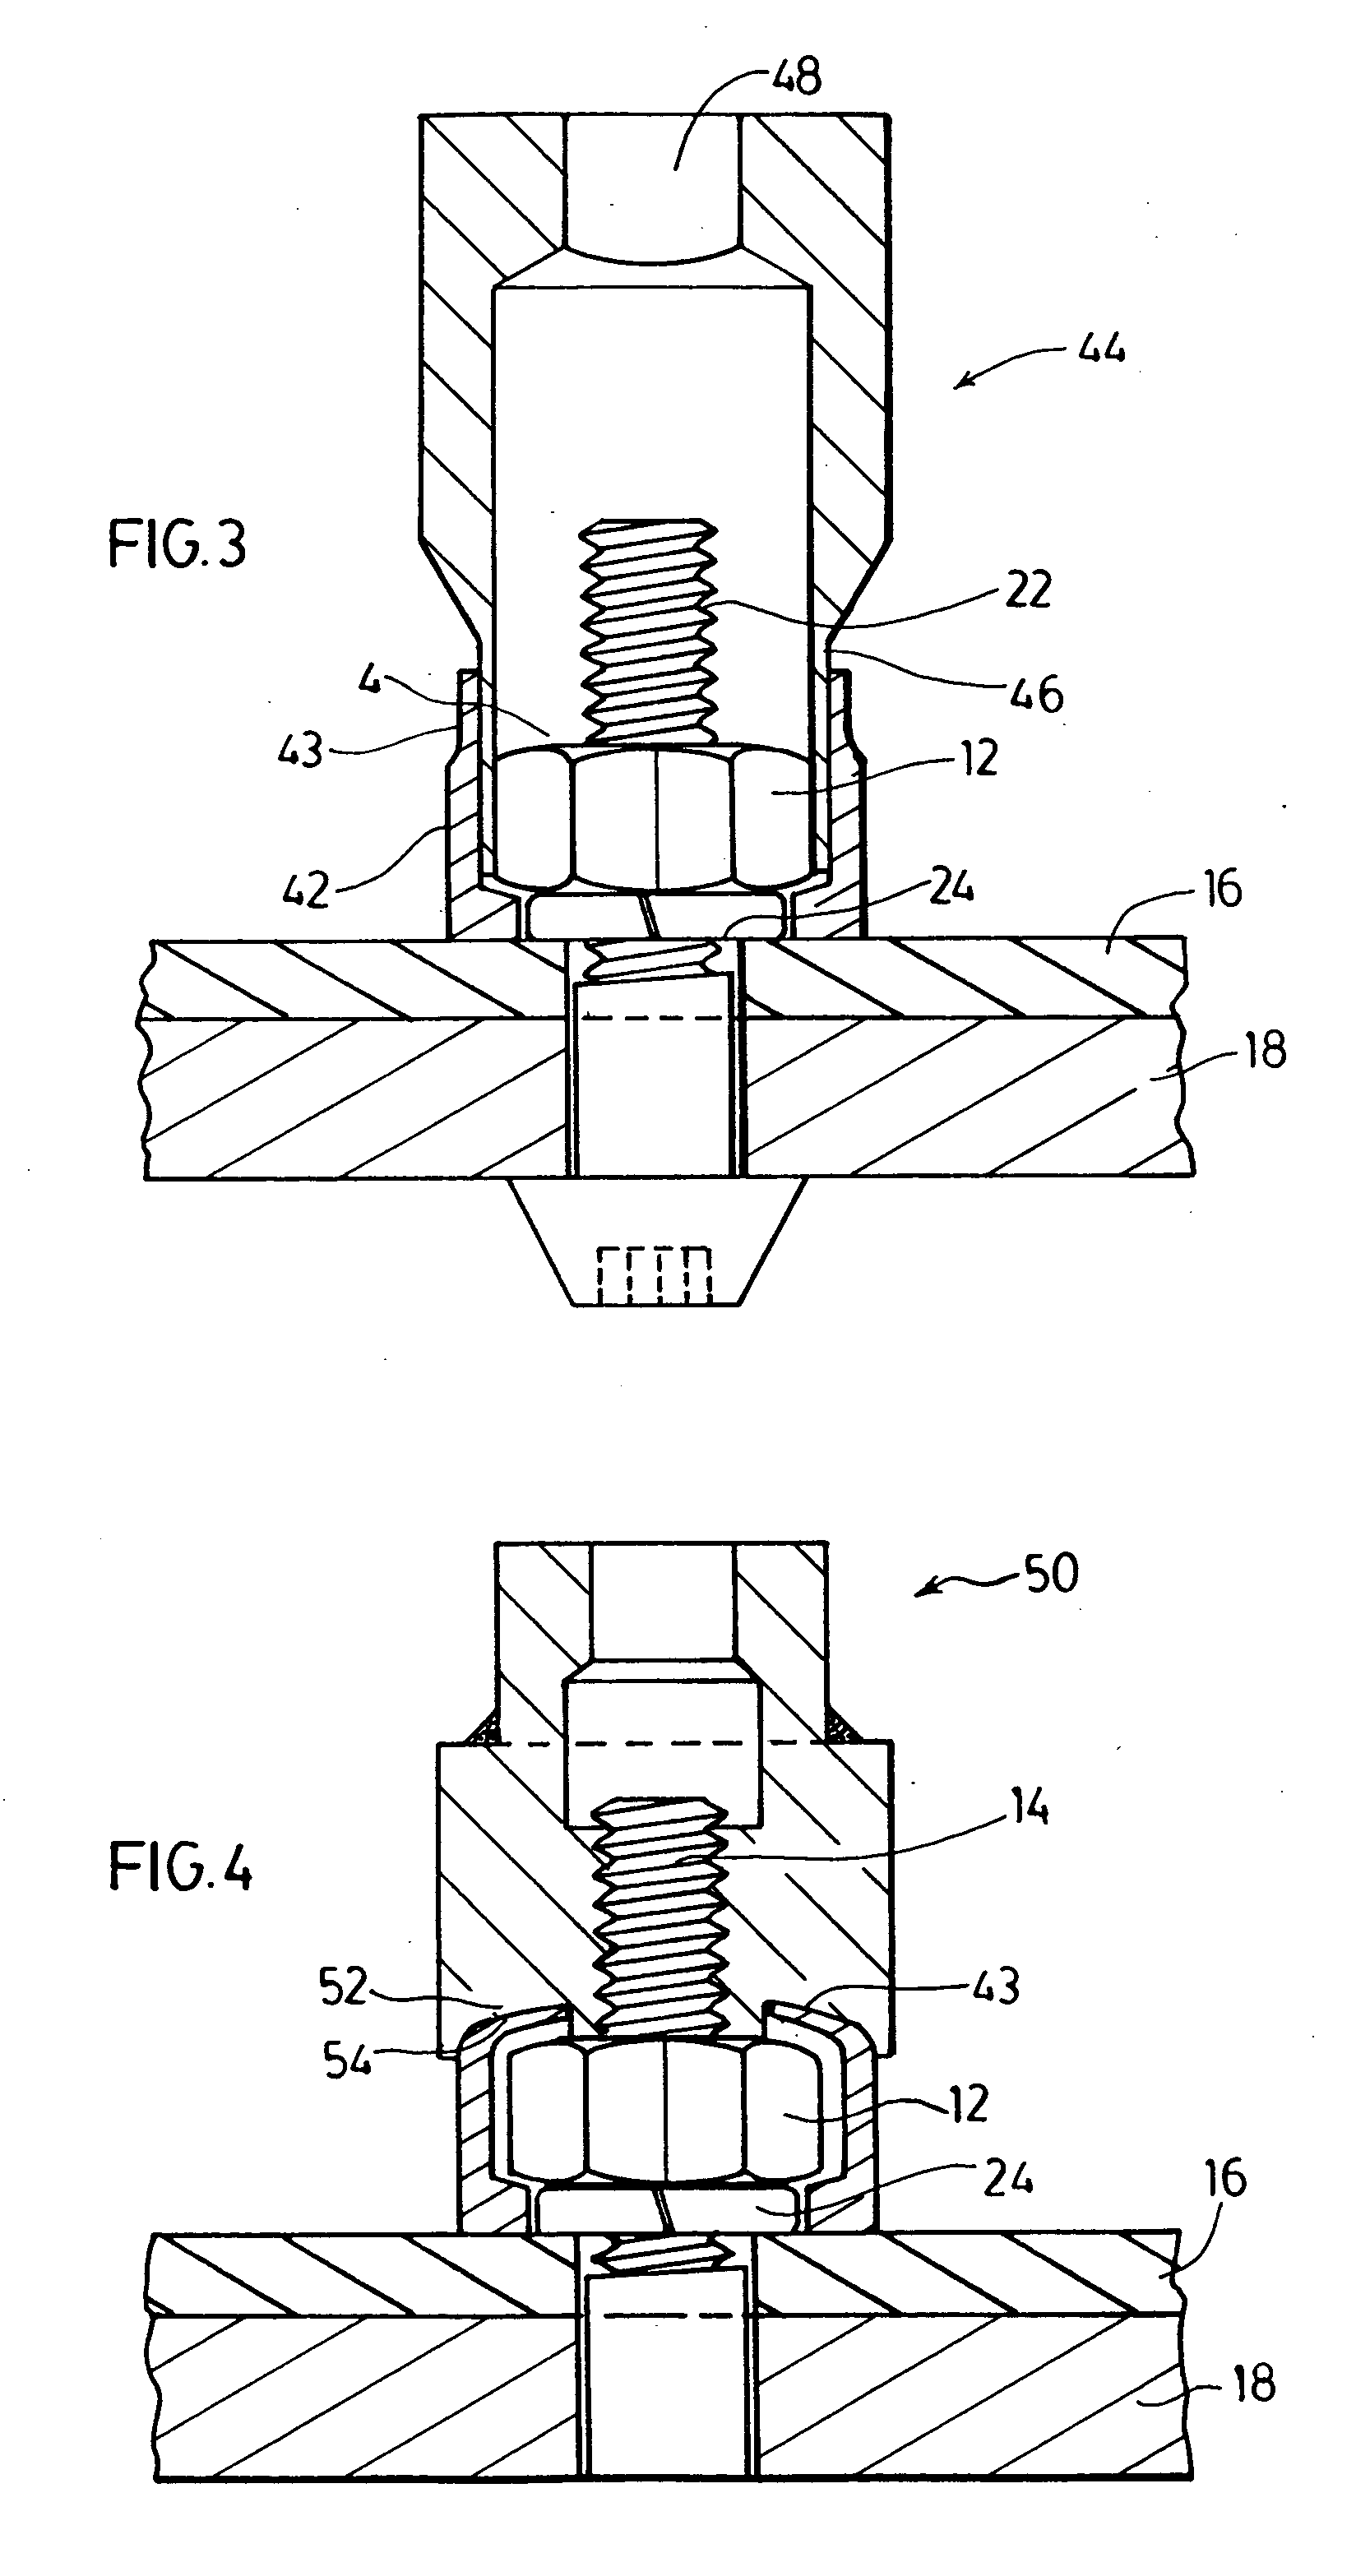 Anti-theft nut and bolt assembly